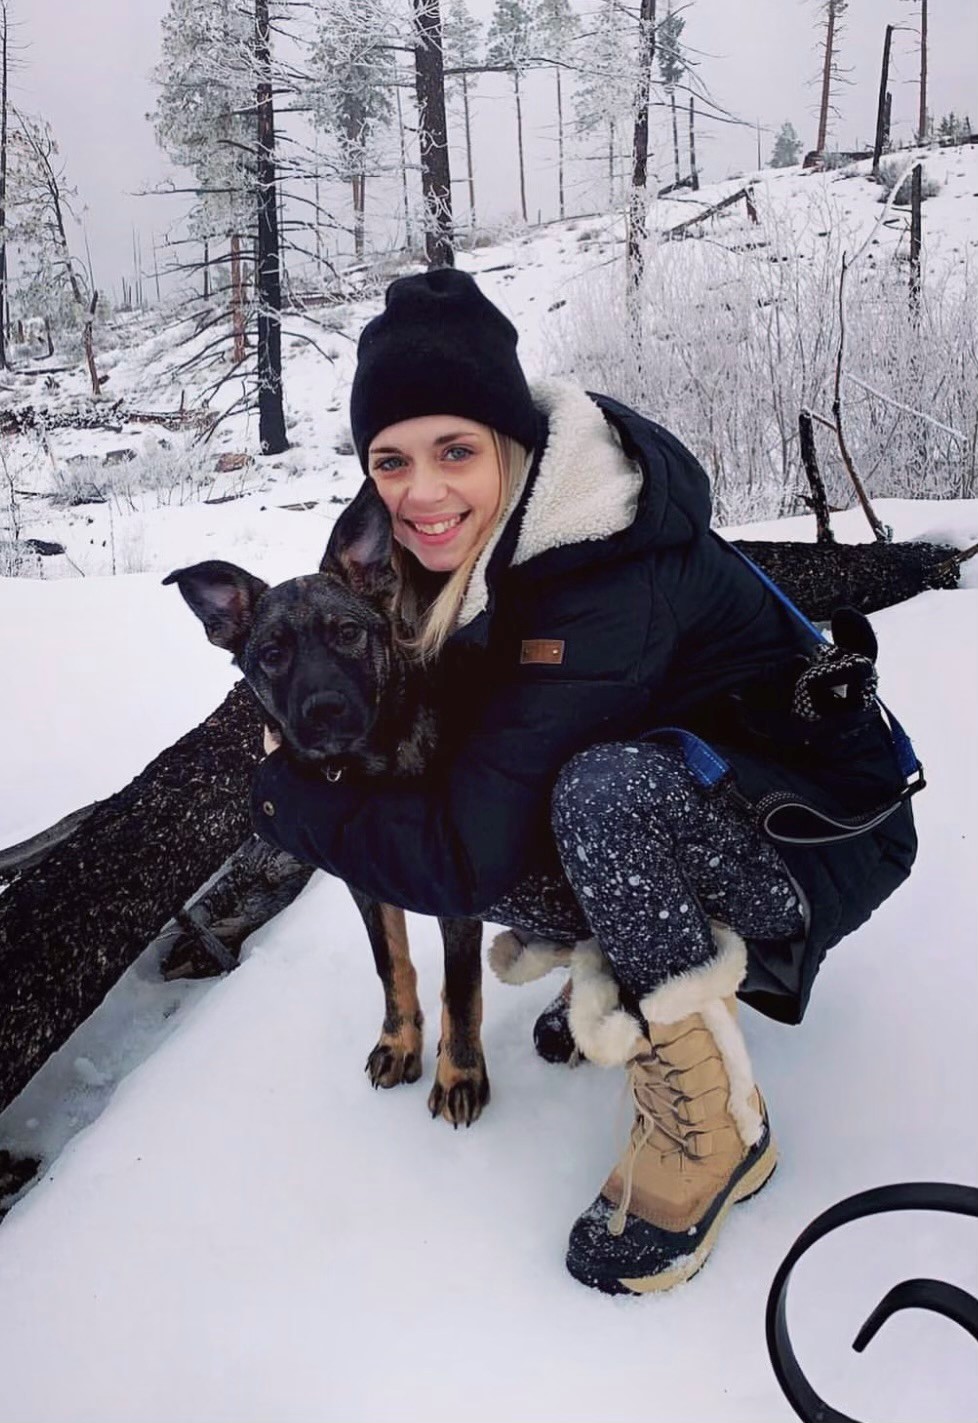 Search for Chelsea Cardno and her dog paused due to unfavorable weather conditions.